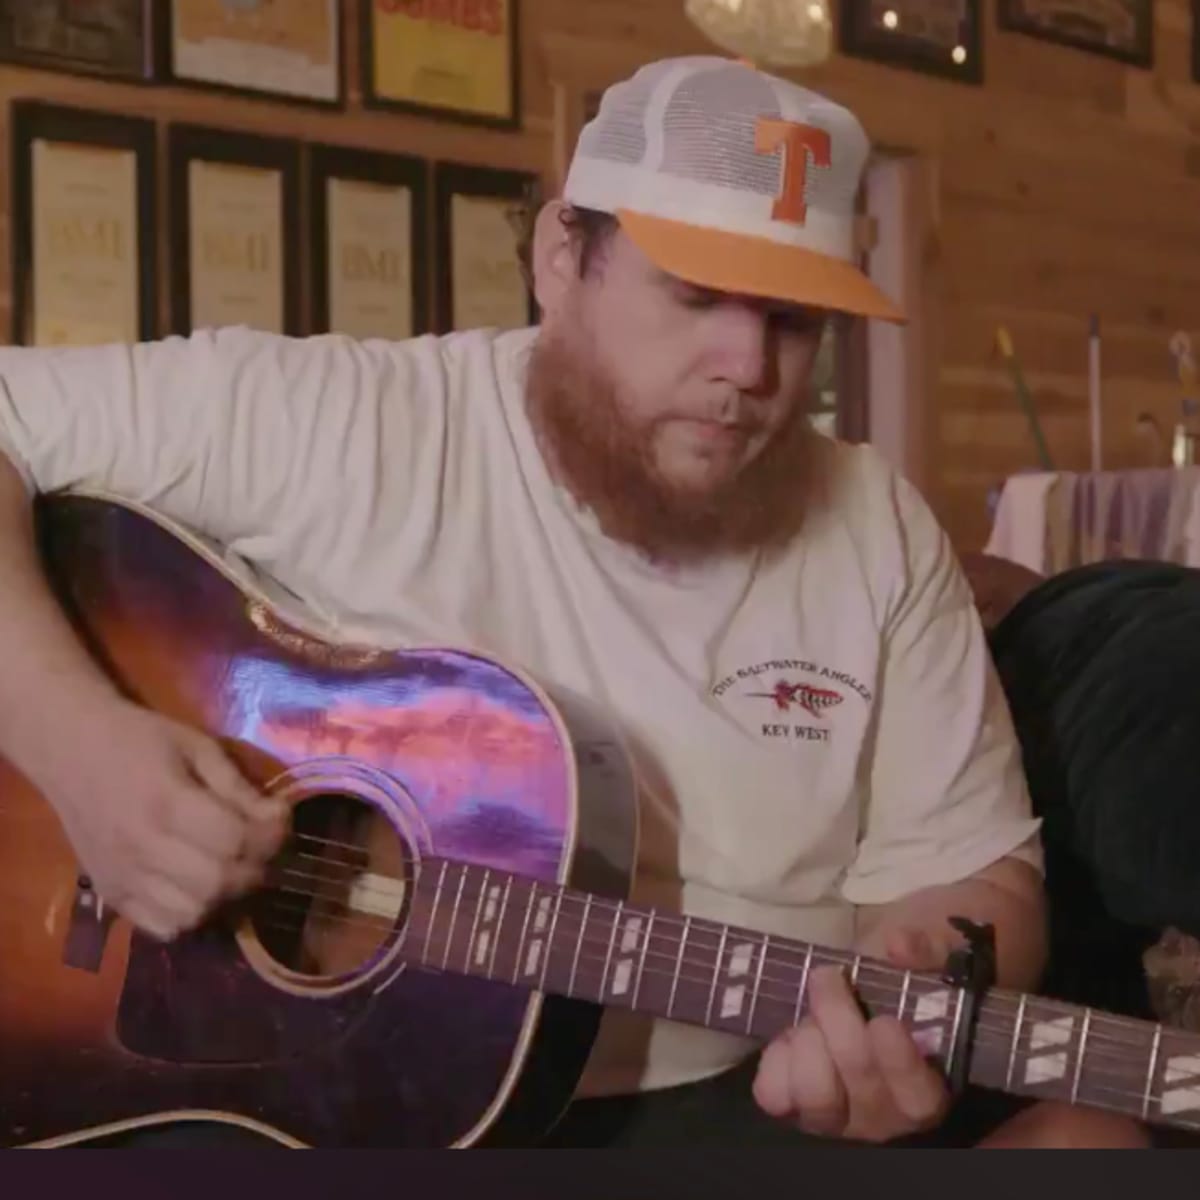 Watch: Luke Combs Debuts New Song in Tennessee Bill Dance Hat